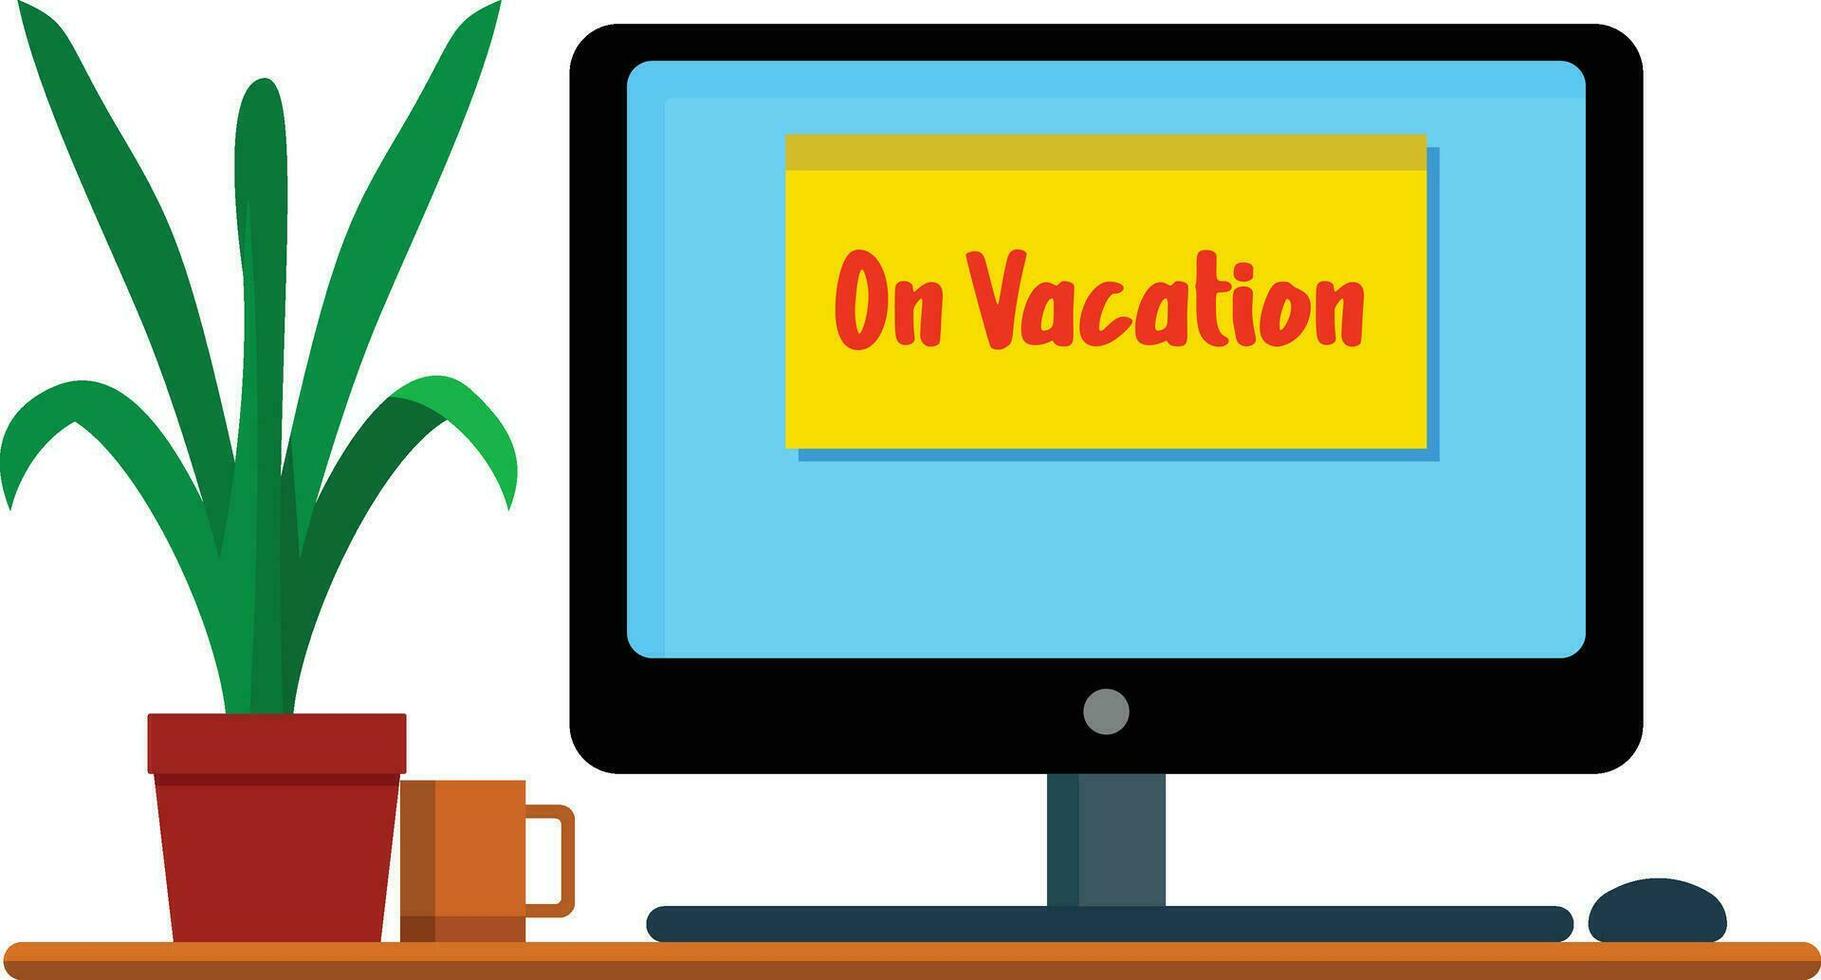 on vacation sticky note on a cubical, computer monitor, desktop, plant, physical files, at office desk stock vector image